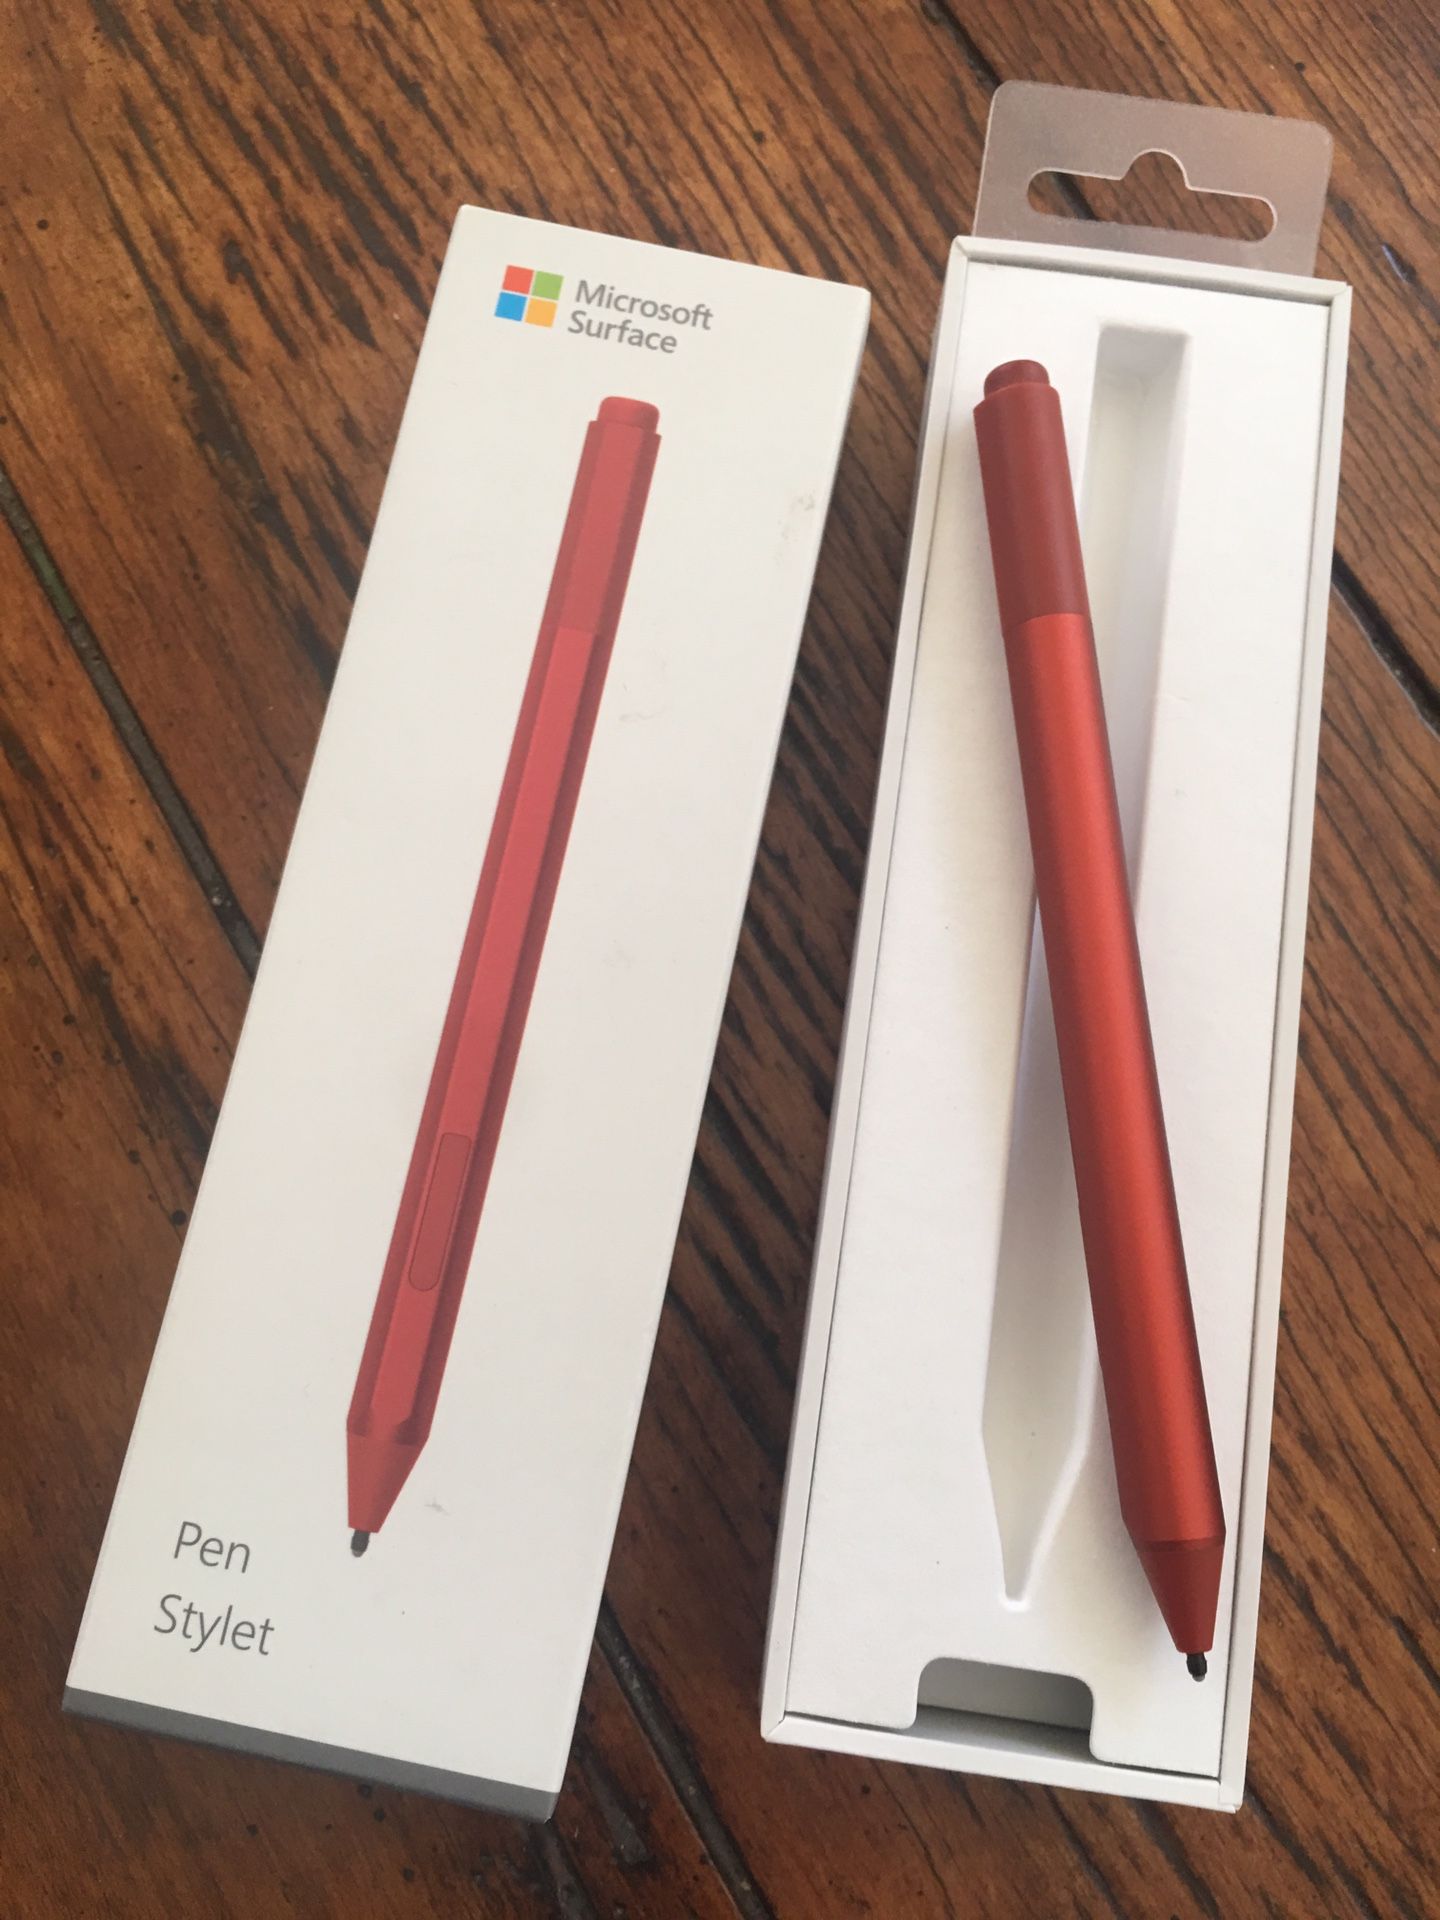 Microsoft Surface Pen Stylet - NEW located in Summerlin